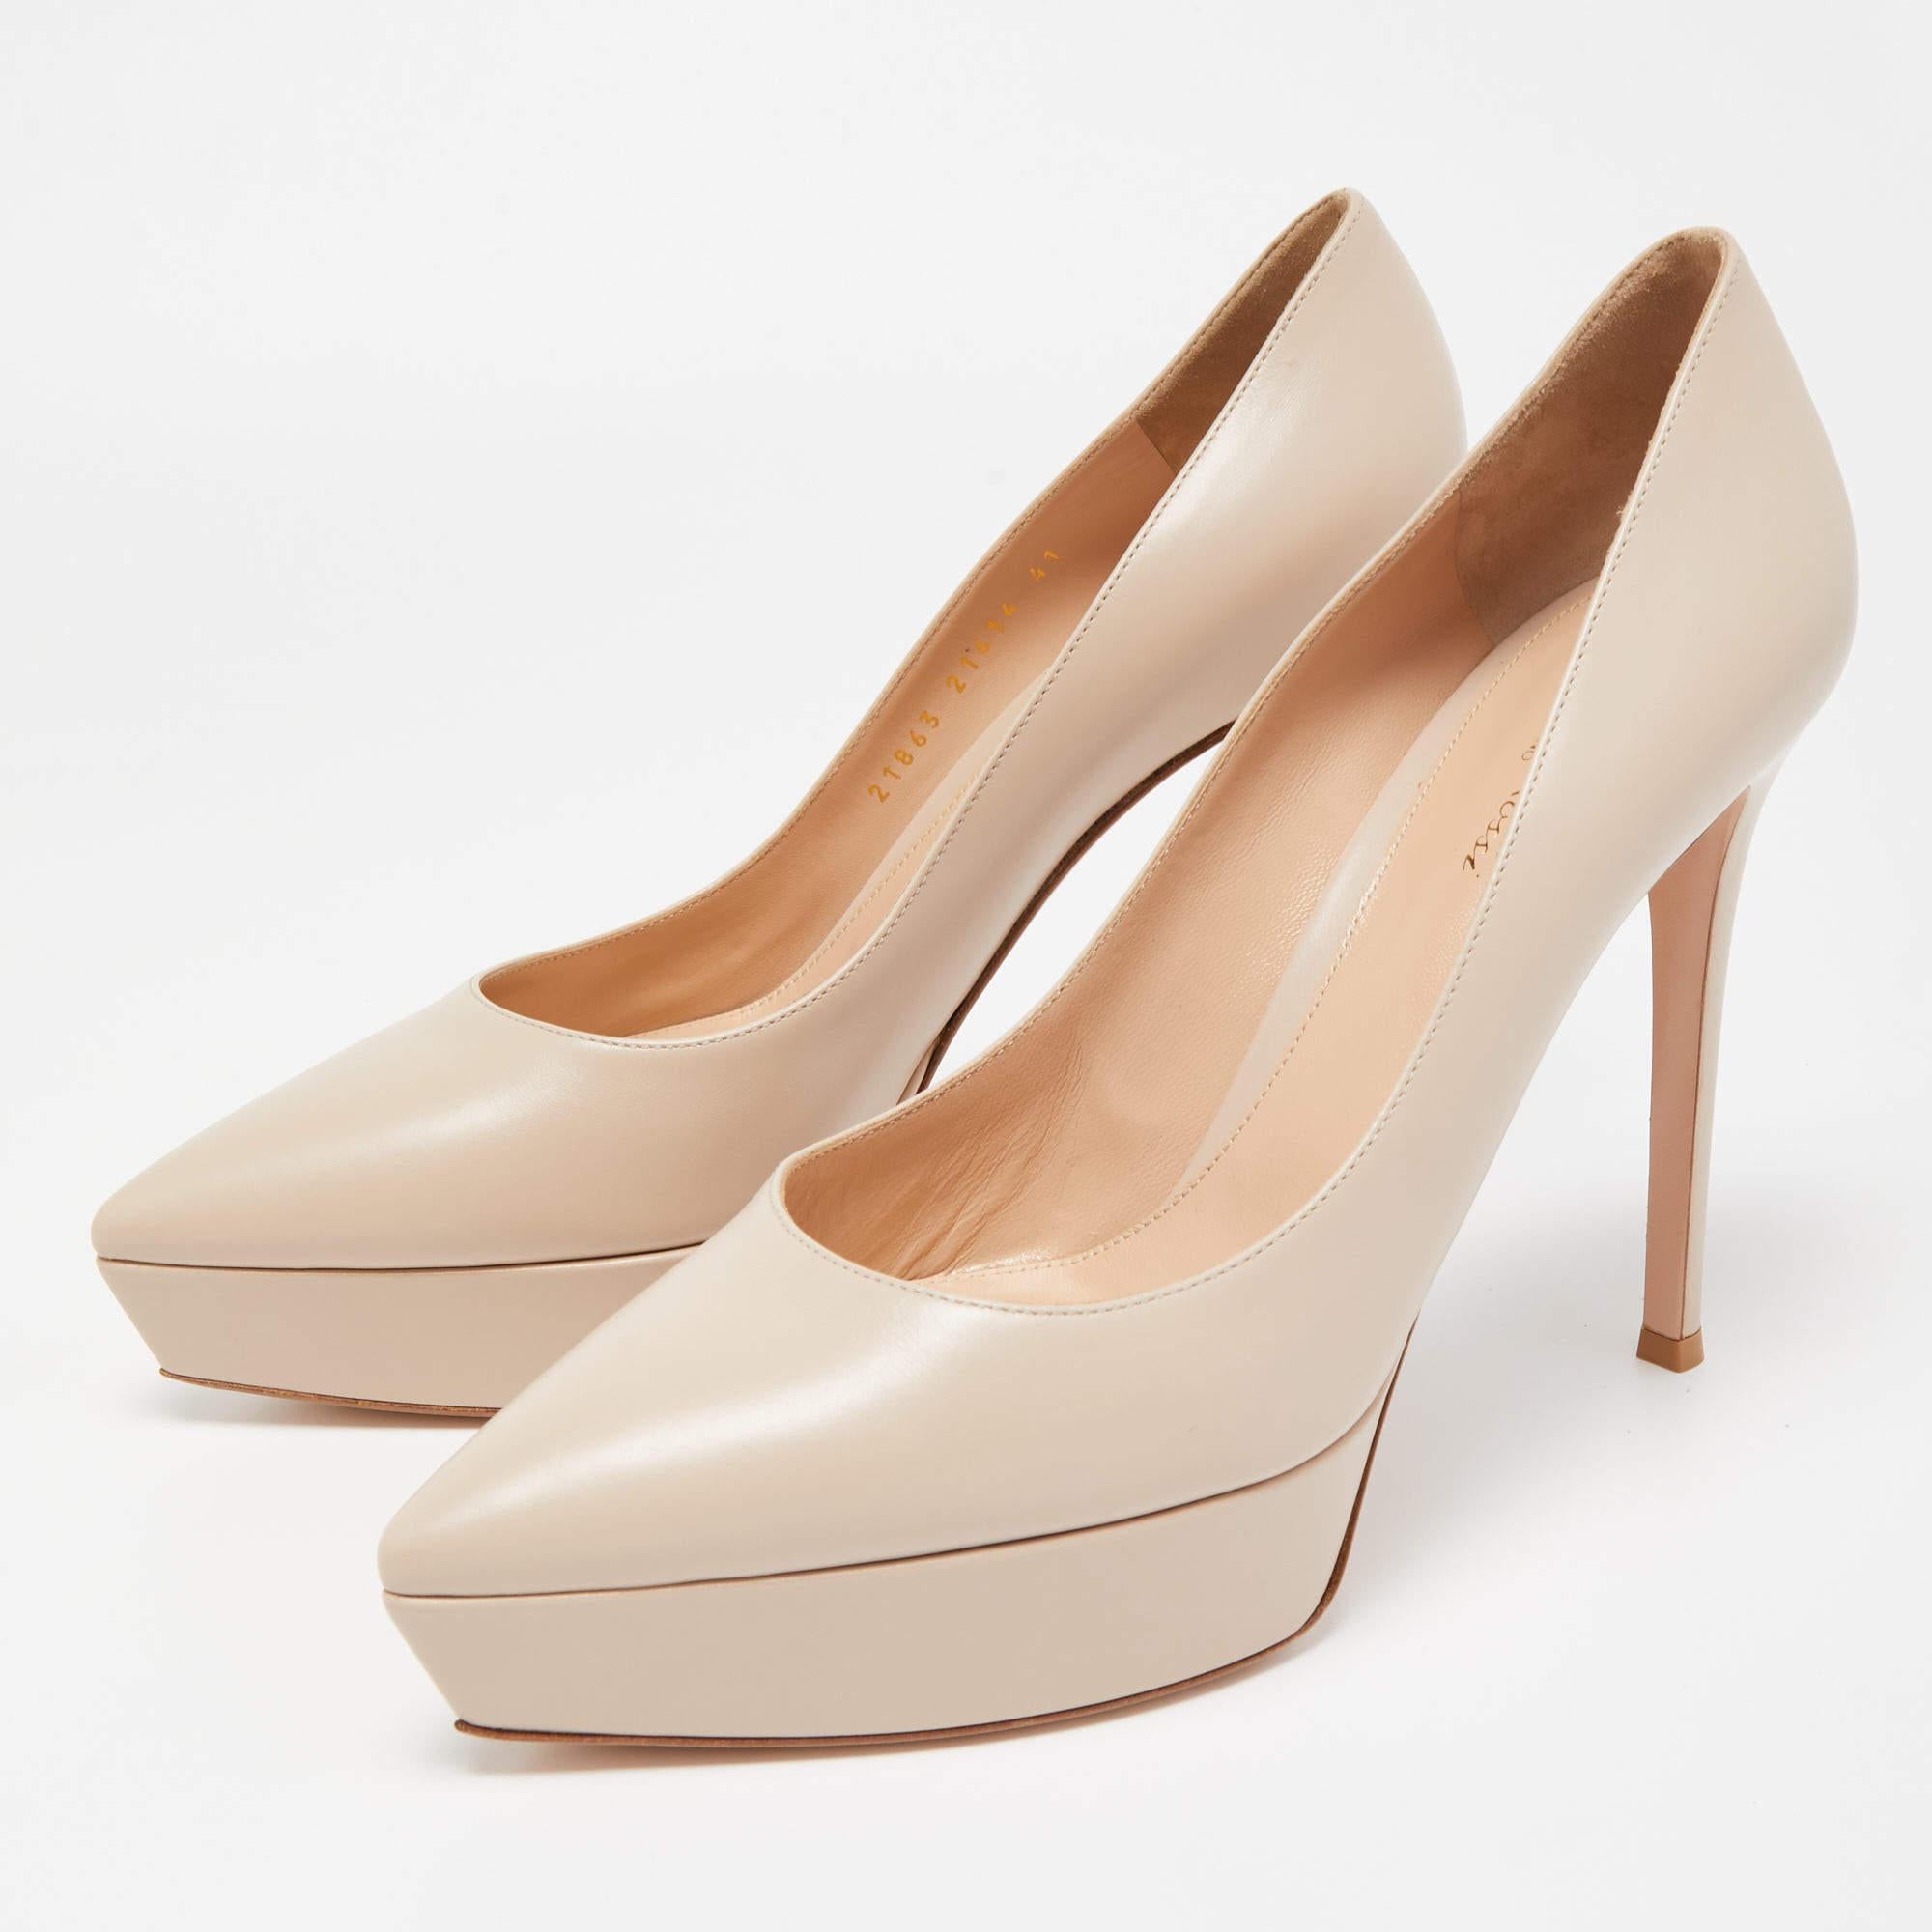 Gianvito Rossi Light Pink Leather Platform Pointed Toe Pumps Size 41 For Sale 4